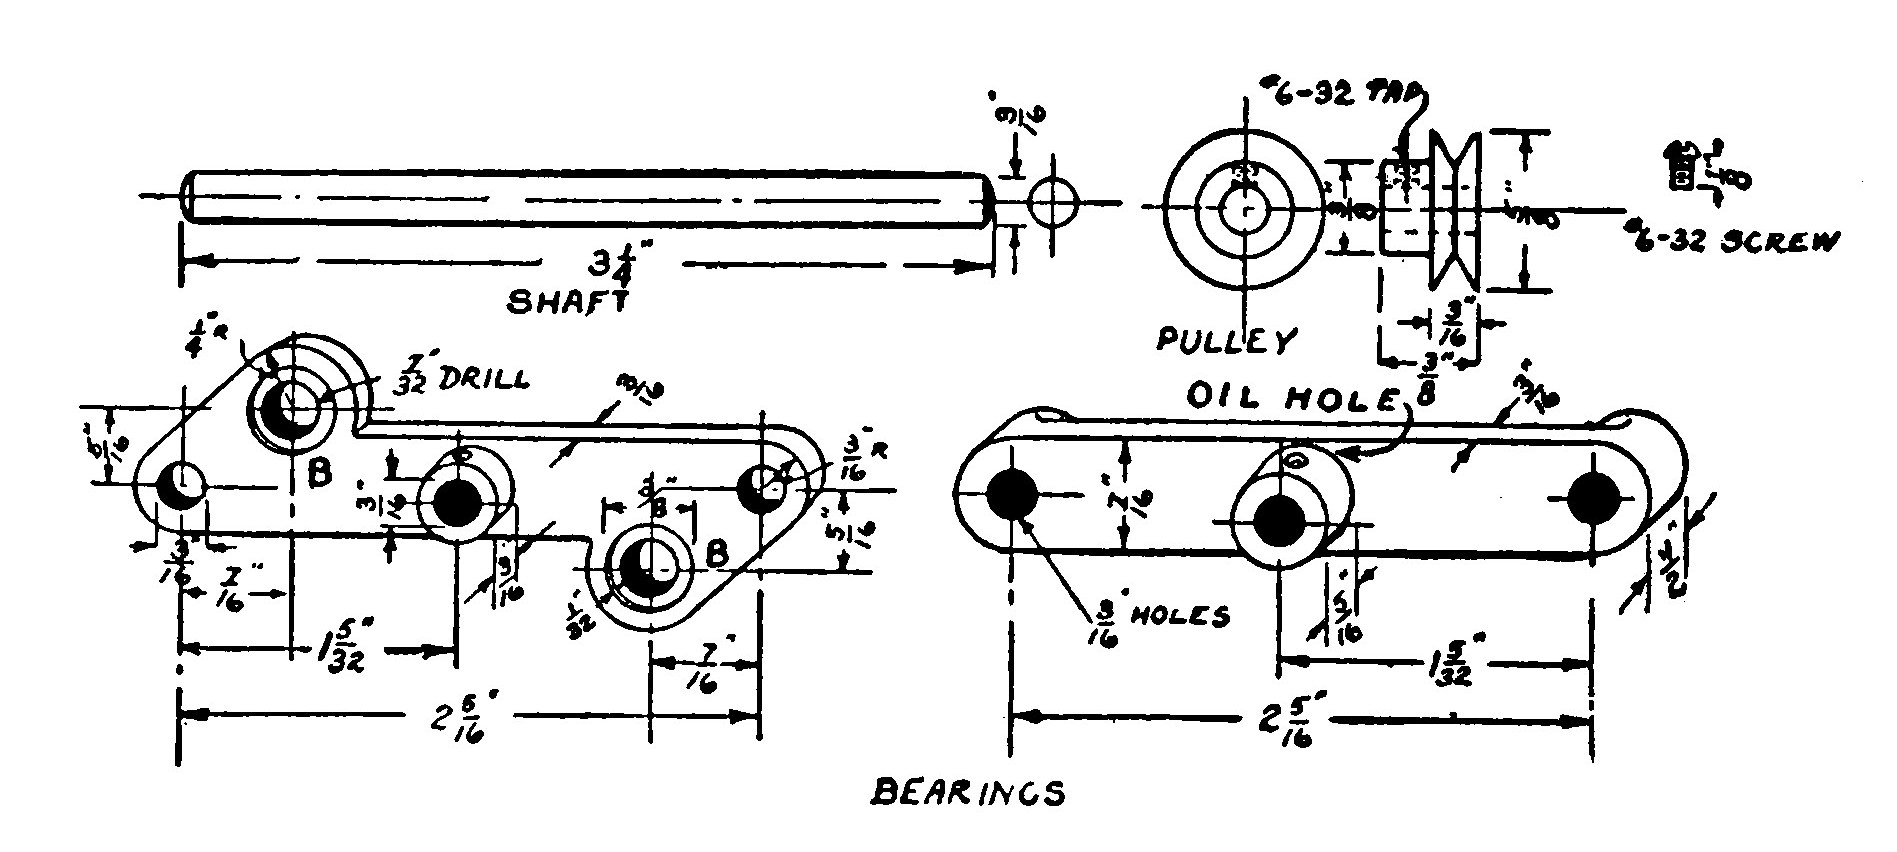 FIG. 66.—Details of the Bearings, Shaft, and Pulley.